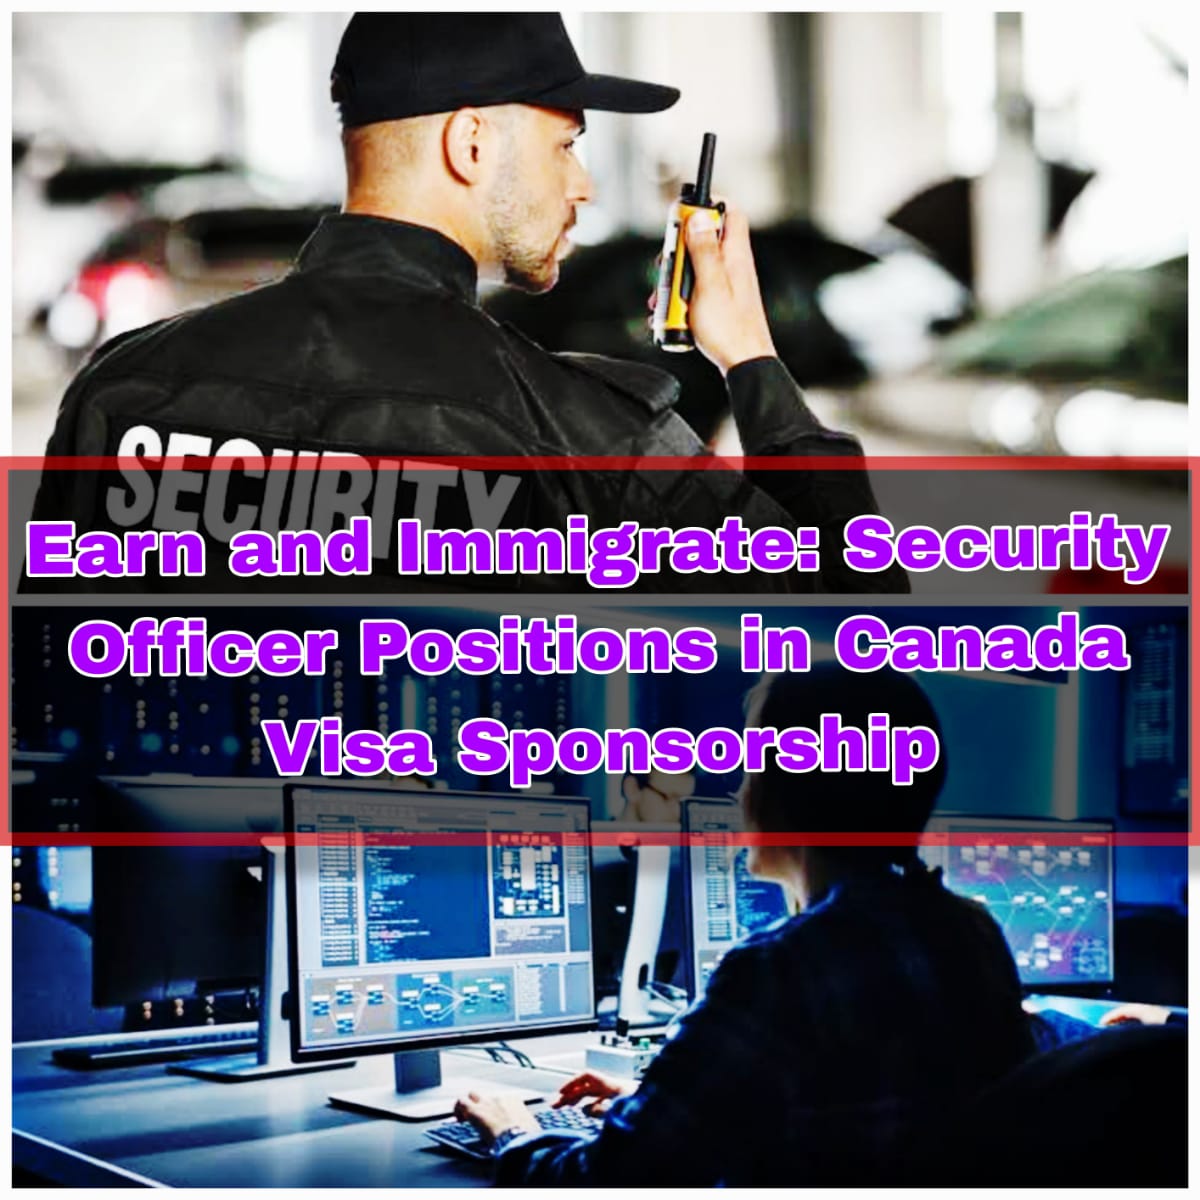 Security Officer Positions in Canada with Visa Sponsorship